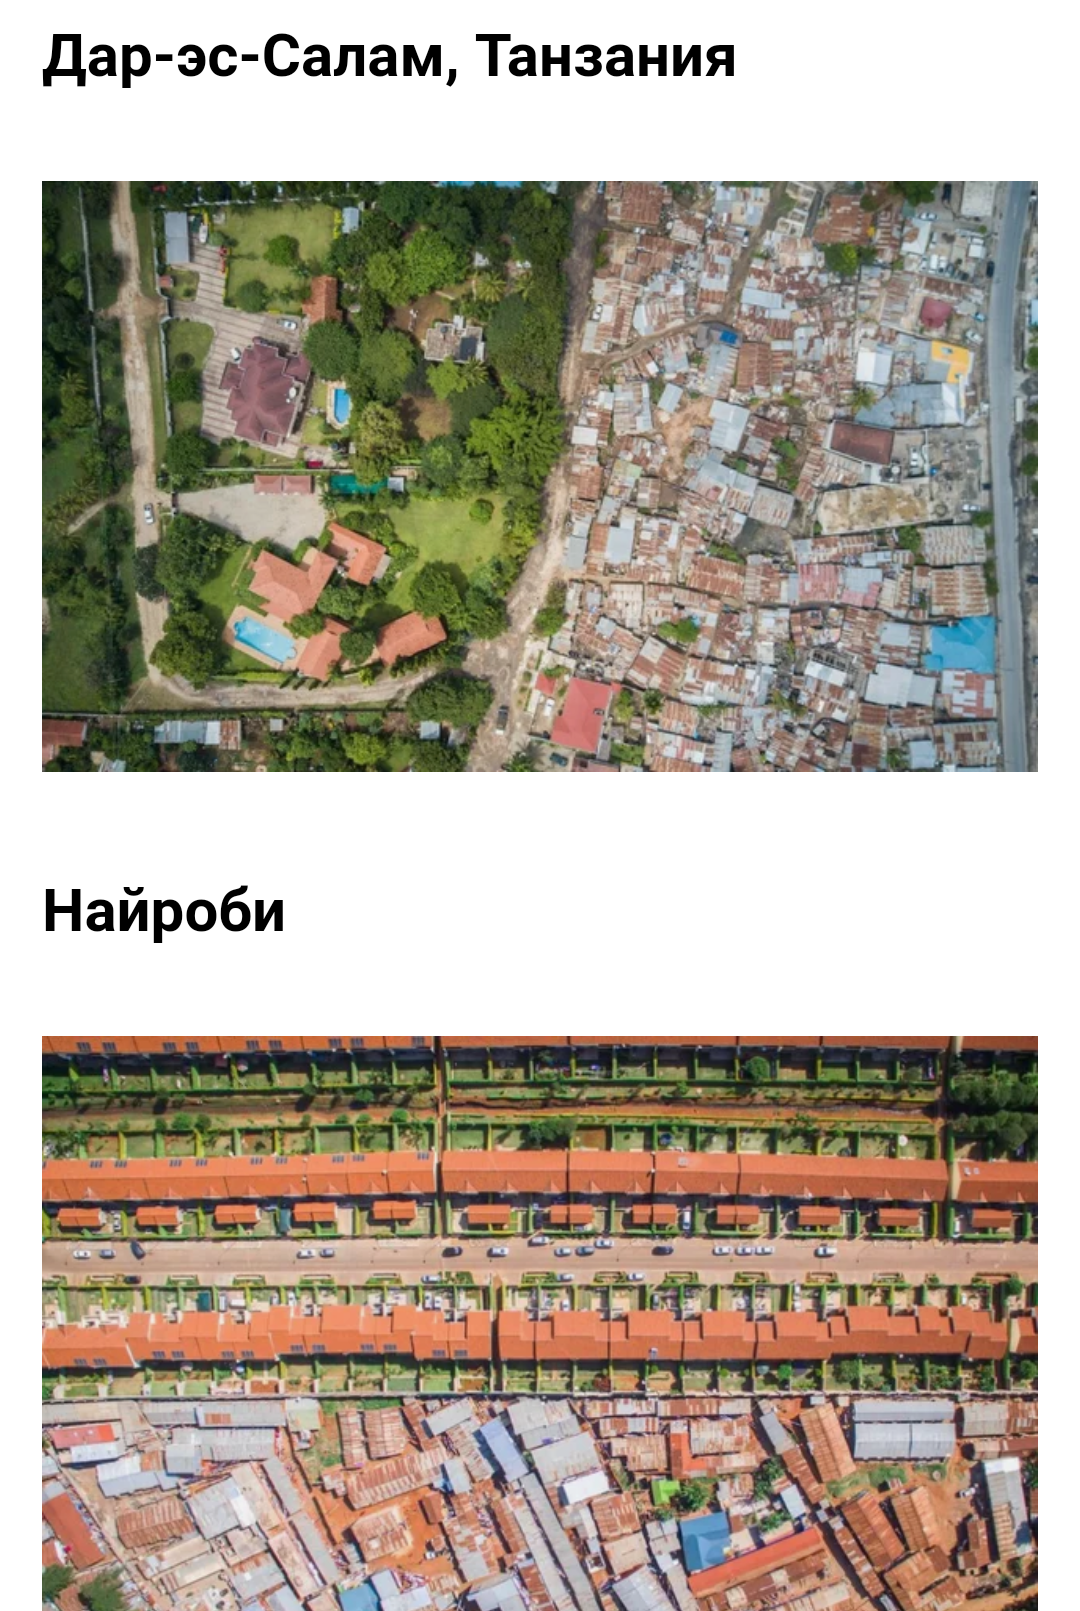 Aerial photographs revealing social inequality in different countries. - Poverty, Wealth, Town, The photo, Photographer, Hot, Country, India, Longpost